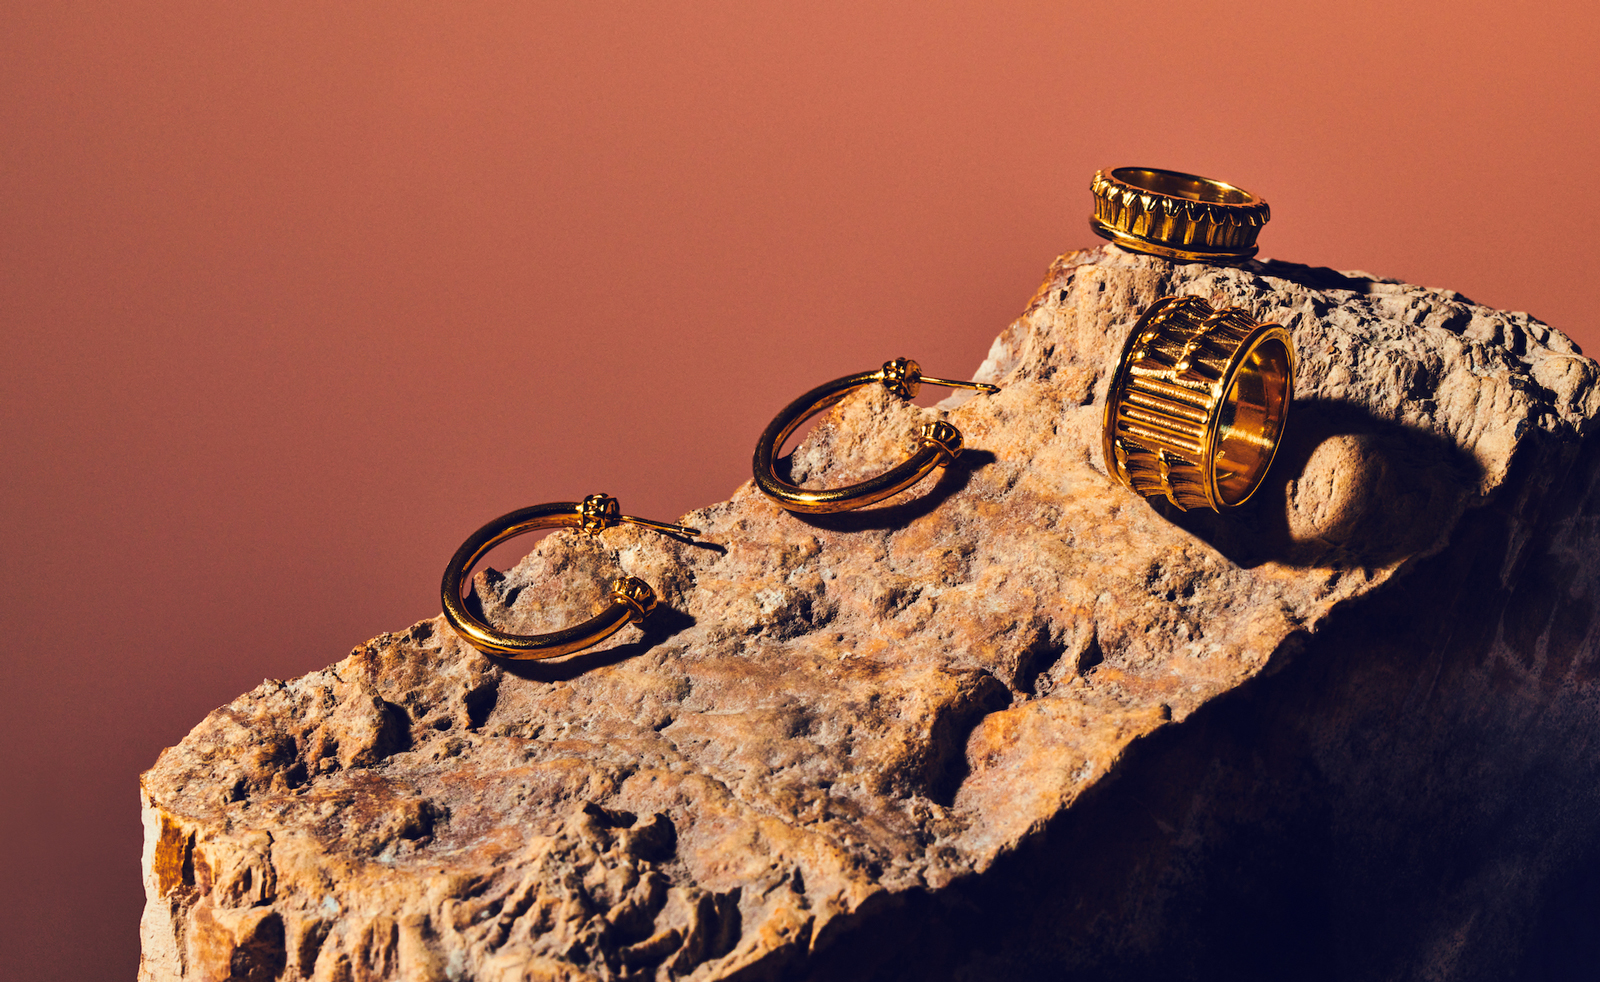 Aymer Maria jewellery gives historical references a…